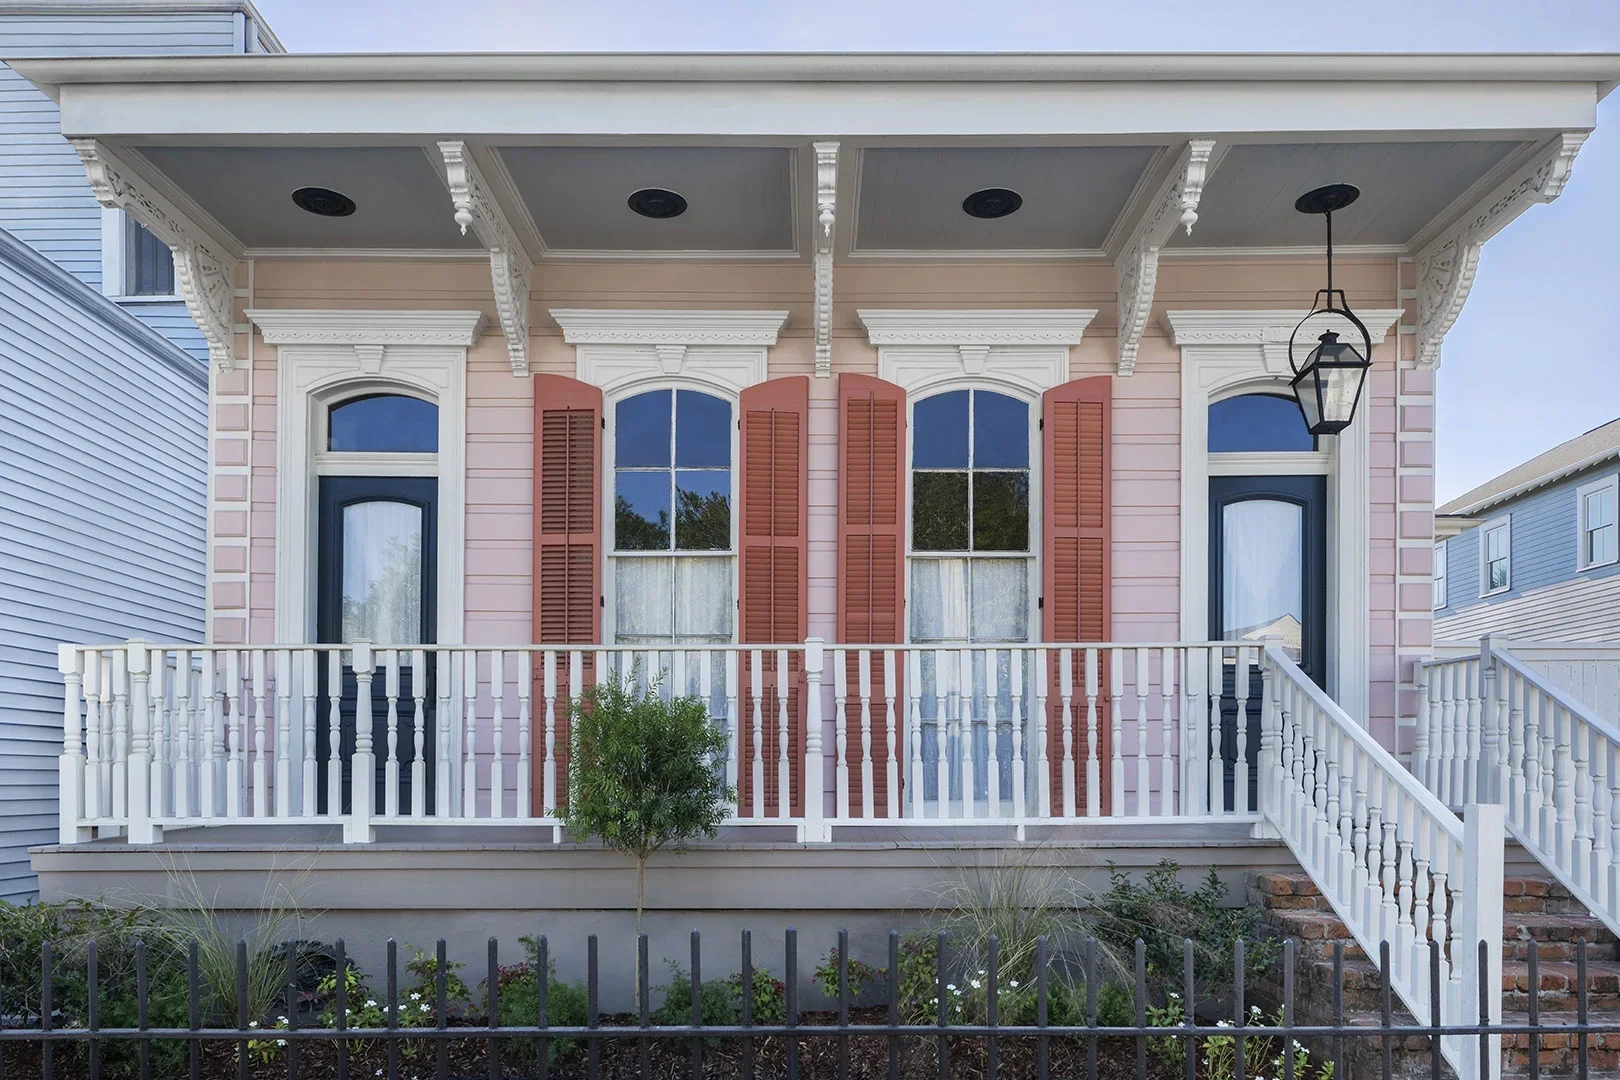 New Orleans-style house exterior painted light pink with darker pink shutters and white balcony.